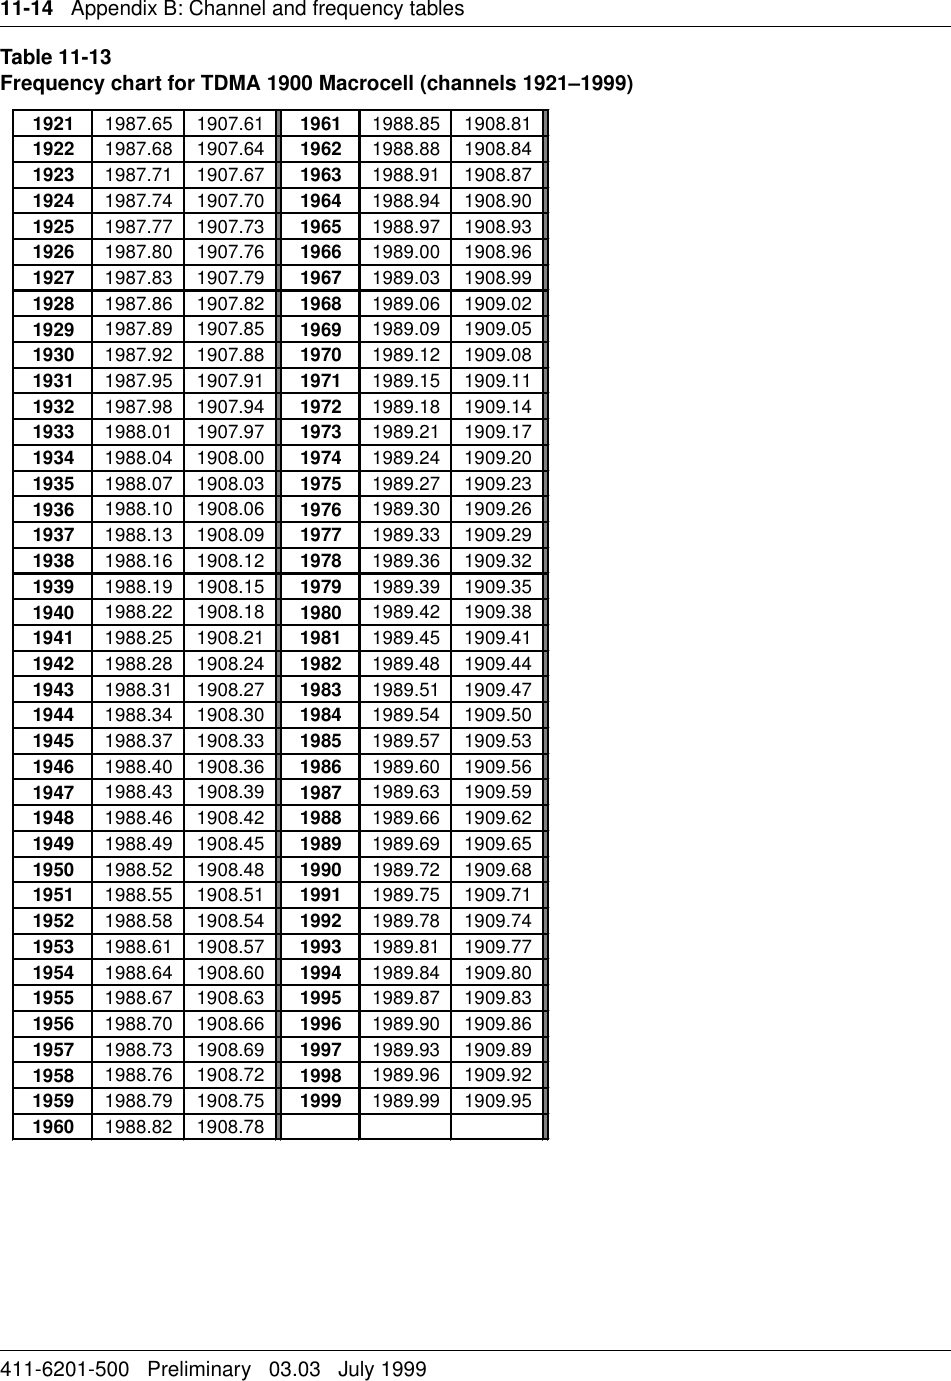 11-14   Appendix B: Channel and frequency tables411-6201-500   Preliminary   03.03   July 1999Table 11-13Frequency chart for TDMA 1900 Macrocell (channels 1921–1999)1921 1987.65 1907.61 1961 1988.85 1908.811922 1987.68 1907.64 1962 1988.88 1908.841923 1987.71 1907.67 1963 1988.91 1908.871924 1987.74 1907.70 1964 1988.94 1908.901925 1987.77 1907.73 1965 1988.97 1908.931926 1987.80 1907.76 1966 1989.00 1908.961927 1987.83 1907.79 1967 1989.03 1908.991928 1987.86 1907.82 1968 1989.06 1909.021929 1987.89 1907.85 1969 1989.09 1909.051930 1987.92 1907.88 1970 1989.12 1909.081931 1987.95 1907.91 1971 1989.15 1909.111932 1987.98 1907.94 1972 1989.18 1909.141933 1988.01 1907.97 1973 1989.21 1909.171934 1988.04 1908.00 1974 1989.24 1909.201935 1988.07 1908.03 1975 1989.27 1909.231936 1988.10 1908.06 1976 1989.30 1909.261937 1988.13 1908.09 1977 1989.33 1909.291938 1988.16 1908.12 1978 1989.36 1909.321939 1988.19 1908.15 1979 1989.39 1909.351940 1988.22 1908.18 1980 1989.42 1909.381941 1988.25 1908.21 1981 1989.45 1909.411942 1988.28 1908.24 1982 1989.48 1909.441943 1988.31 1908.27 1983 1989.51 1909.471944 1988.34 1908.30 1984 1989.54 1909.501945 1988.37 1908.33 1985 1989.57 1909.531946 1988.40 1908.36 1986 1989.60 1909.561947 1988.43 1908.39 1987 1989.63 1909.591948 1988.46 1908.42 1988 1989.66 1909.621949 1988.49 1908.45 1989 1989.69 1909.651950 1988.52 1908.48 1990 1989.72 1909.681951 1988.55 1908.51 1991 1989.75 1909.711952 1988.58 1908.54 1992 1989.78 1909.741953 1988.61 1908.57 1993 1989.81 1909.771954 1988.64 1908.60 1994 1989.84 1909.801955 1988.67 1908.63 1995 1989.87 1909.831956 1988.70 1908.66 1996 1989.90 1909.861957 1988.73 1908.69 1997 1989.93 1909.891958 1988.76 1908.72 1998 1989.96 1909.921959 1988.79 1908.75 1999 1989.99 1909.951960 1988.82 1908.78